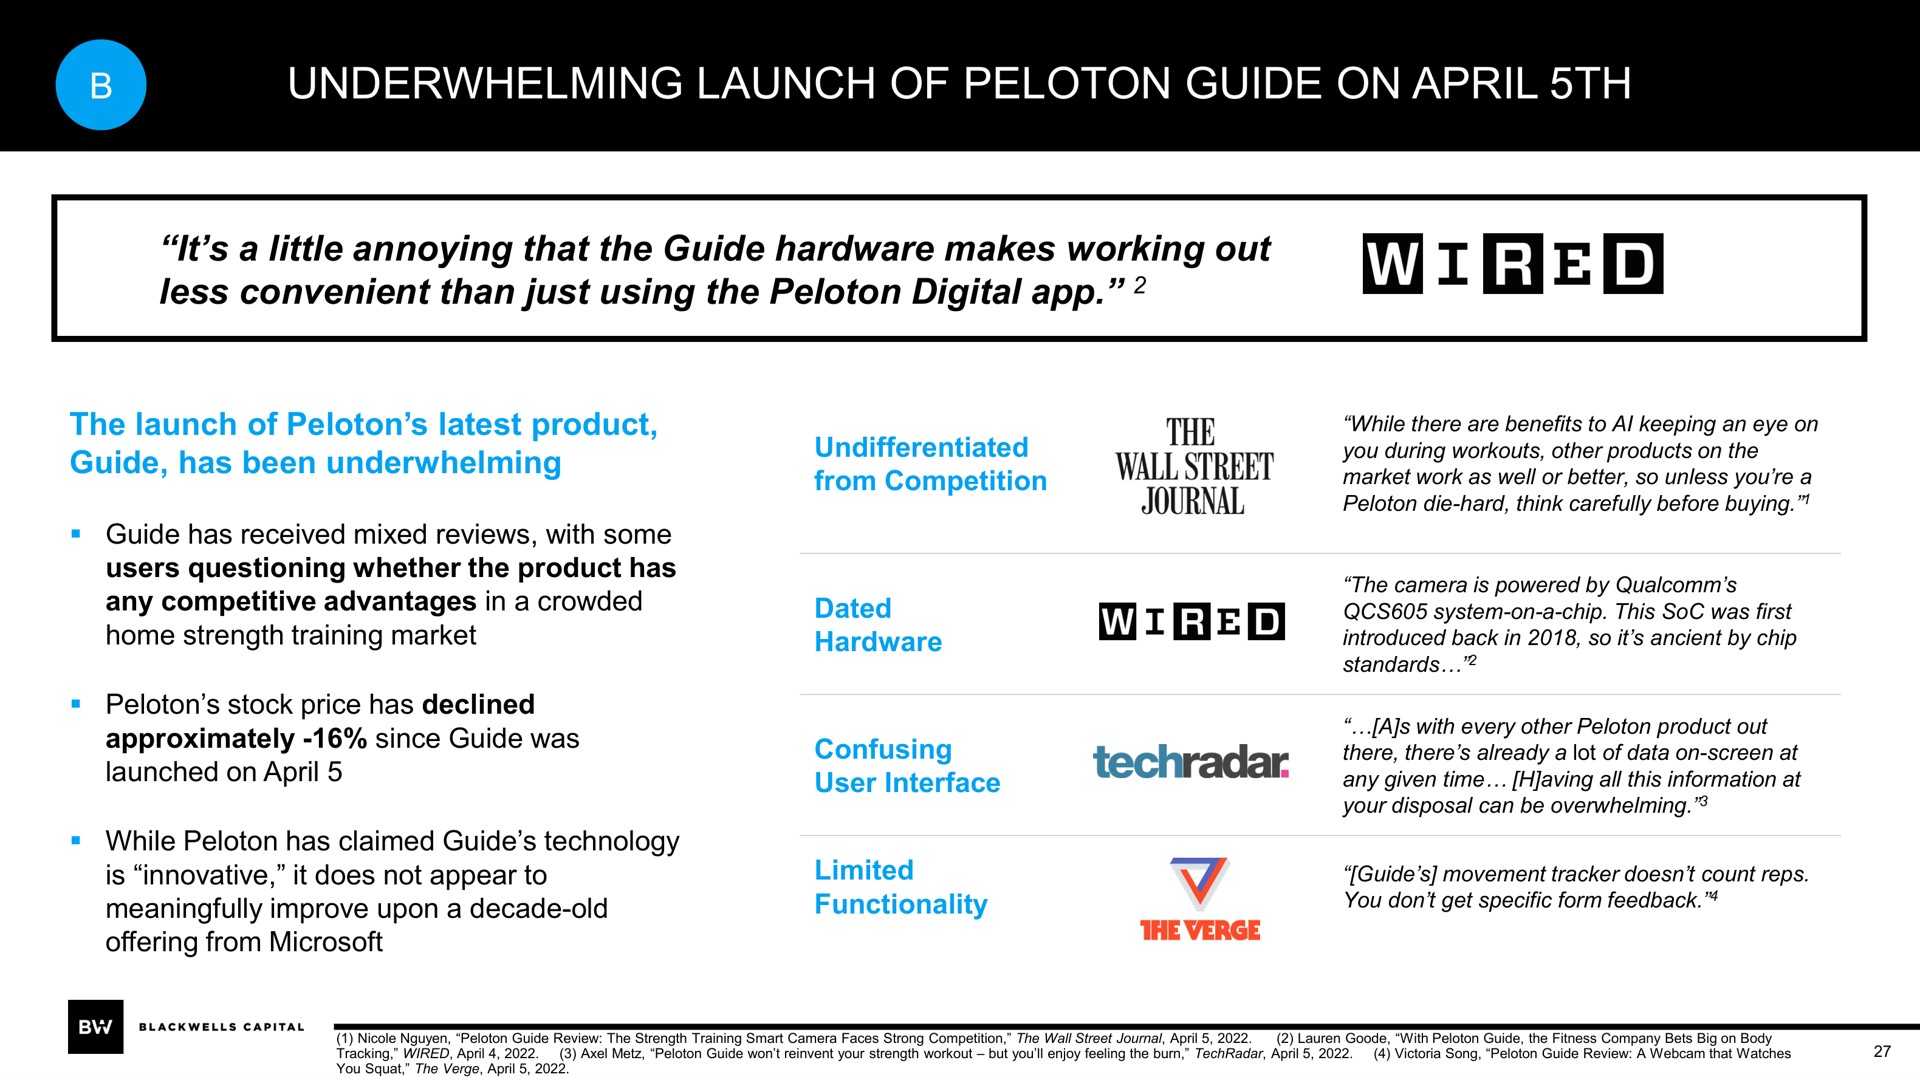 launch of peloton guide on it a little annoying that the guide hardware makes working out less convenient than just using the peloton digital | Blackwells Capital